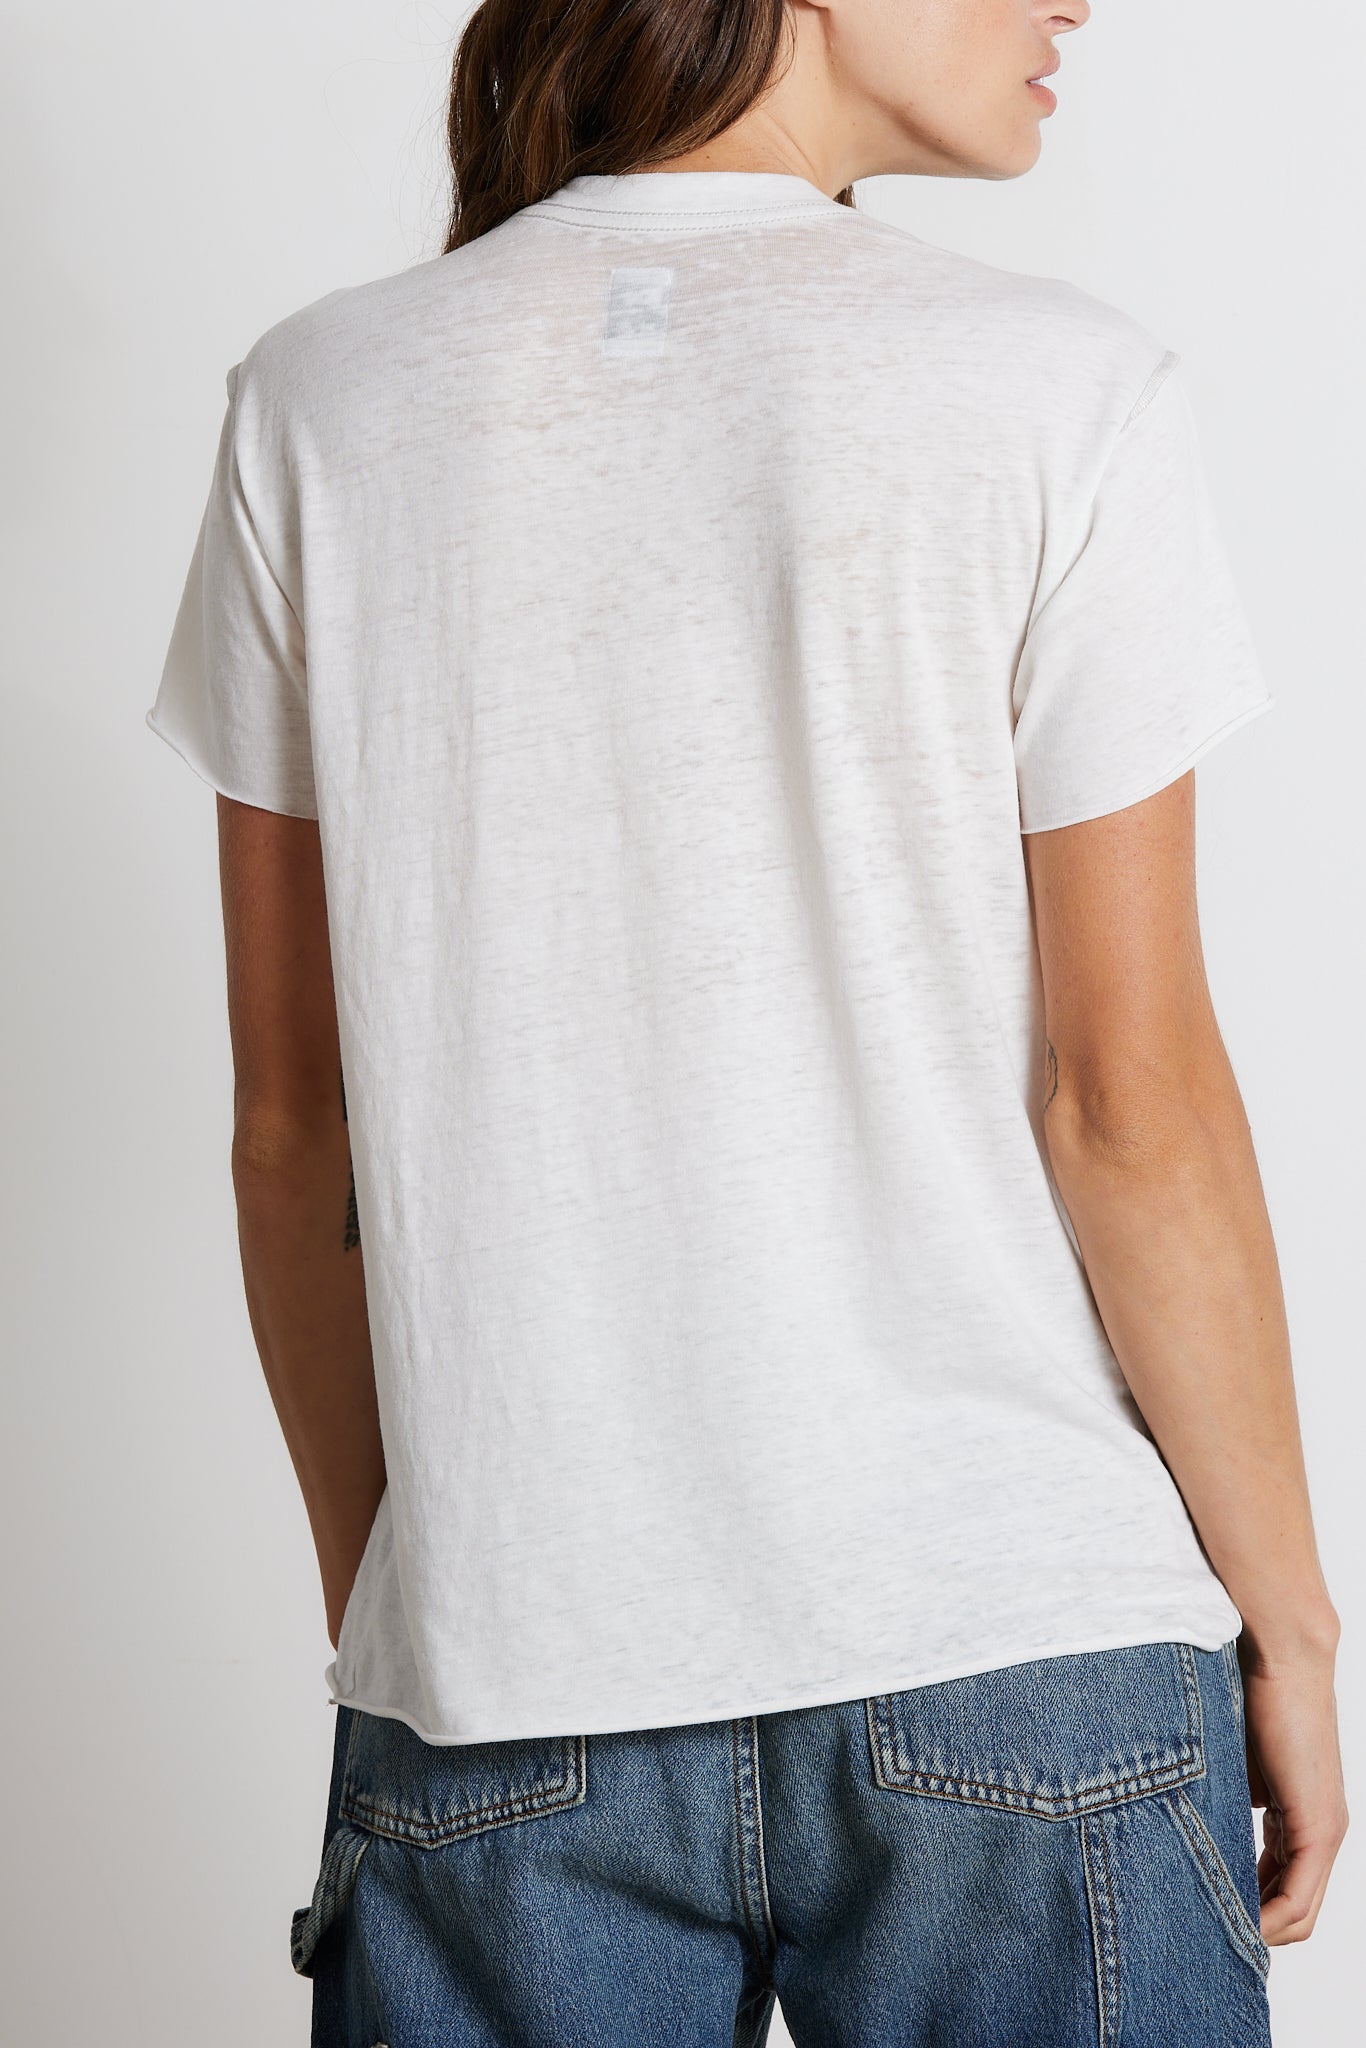 MOORE TEE / WHITE BURNOUT